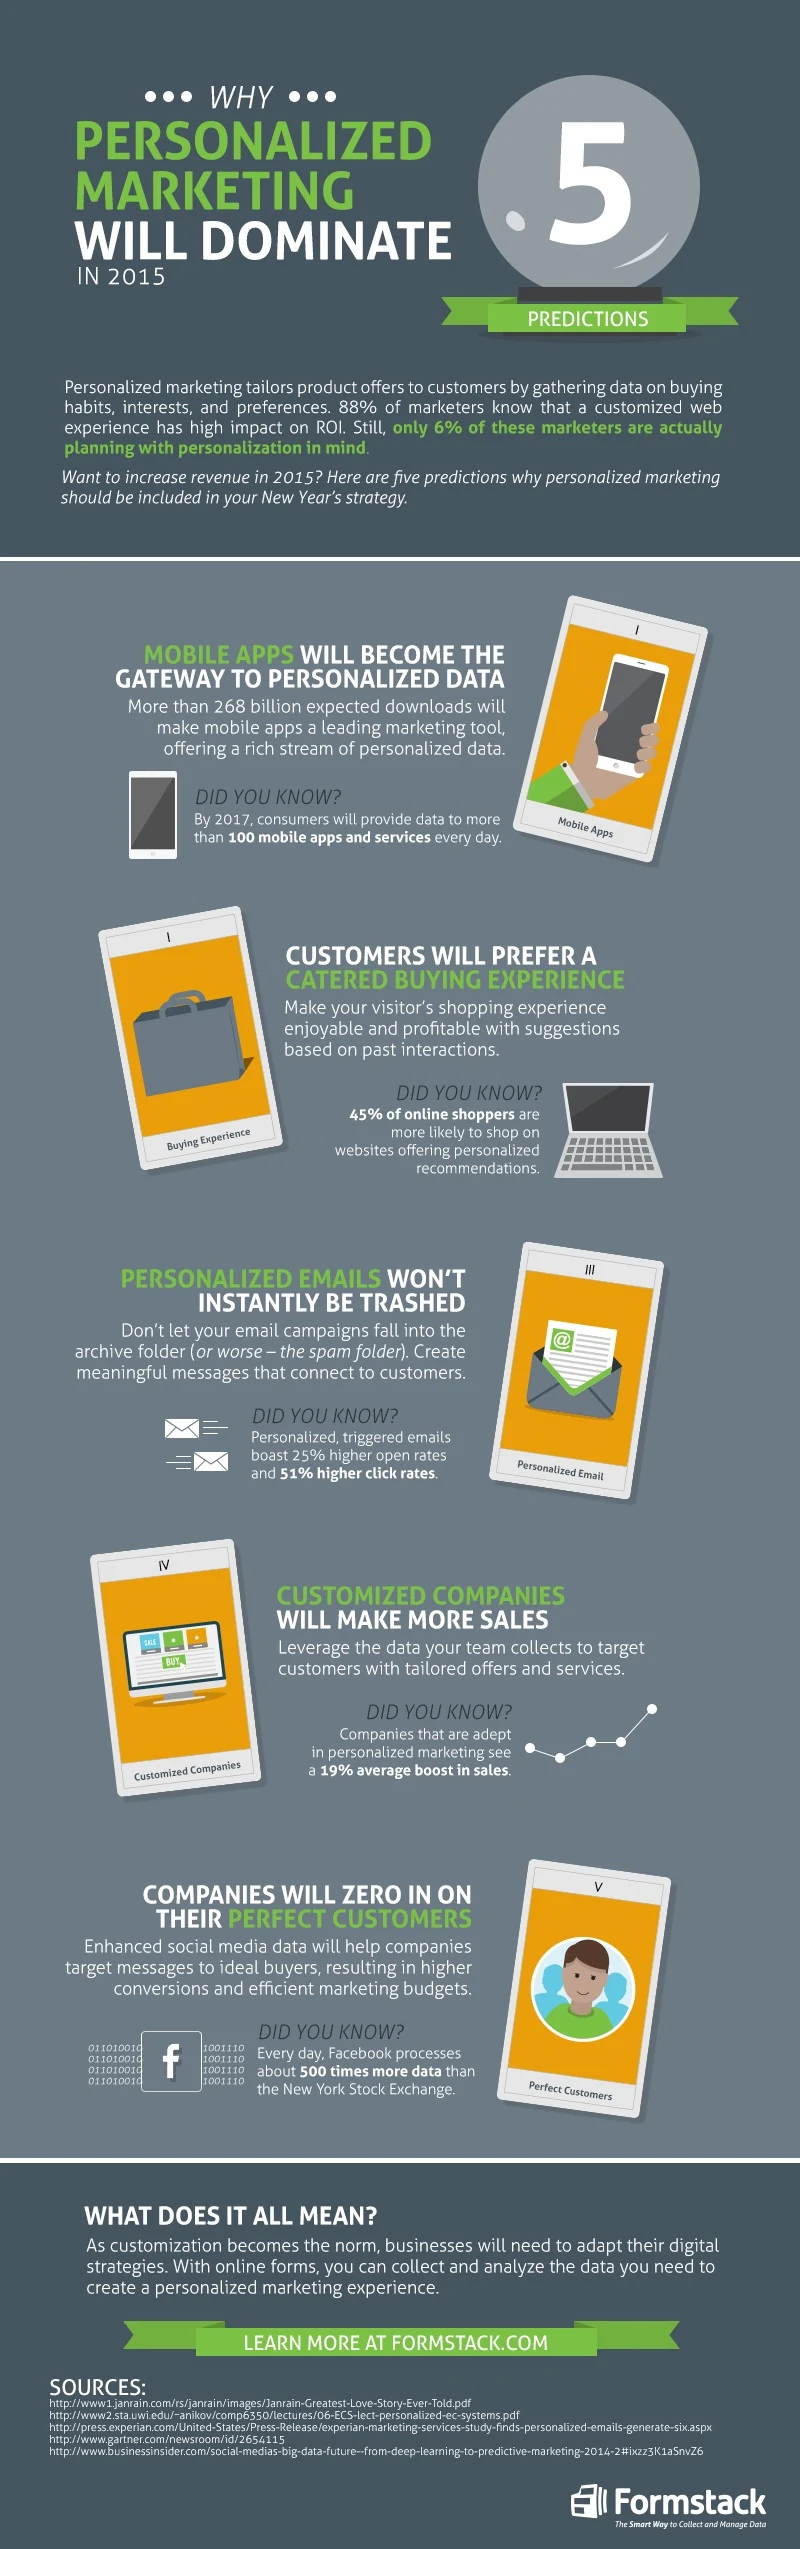 5 Prediction: Why Personalized Marketing Will Dominate in 2015 - #infographic